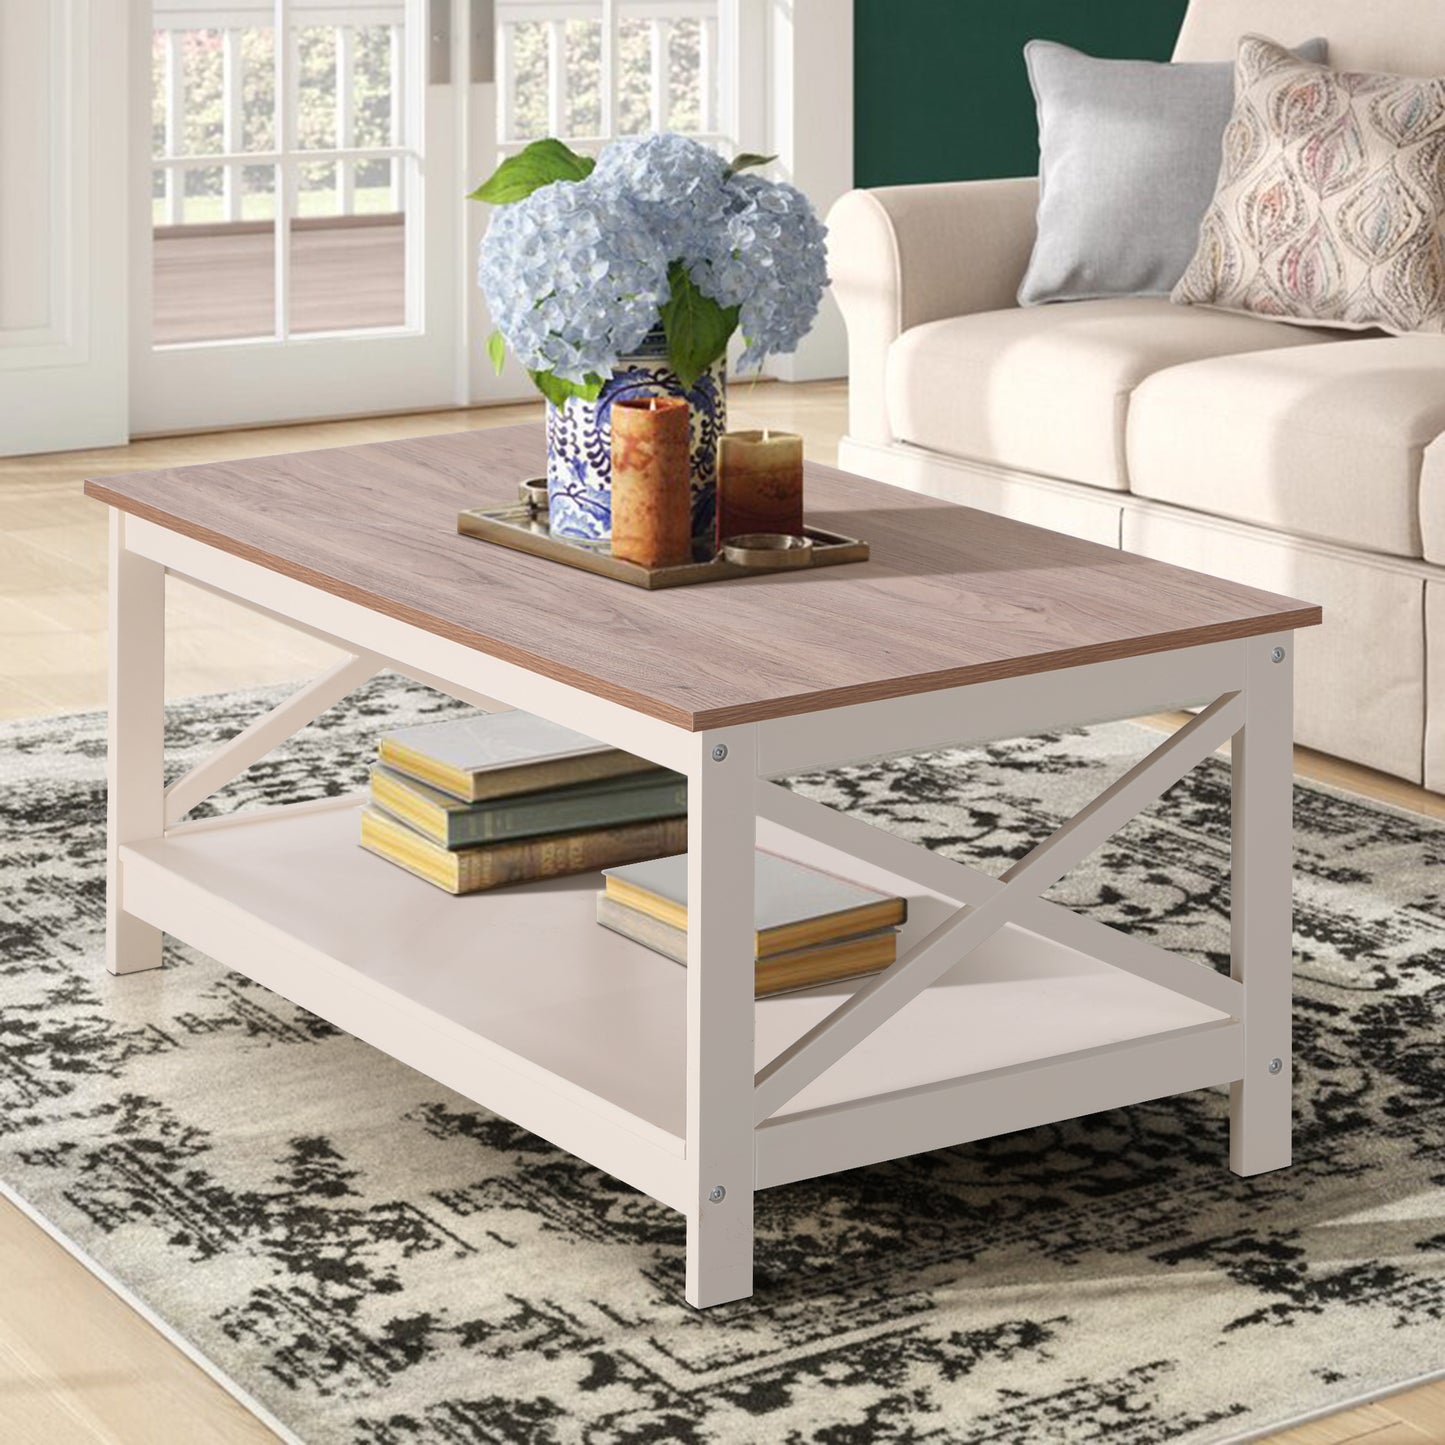 Sophia&William Coffee Table Farmhouse Cocktail Table with Storage Shelf for Living Room-Ivory